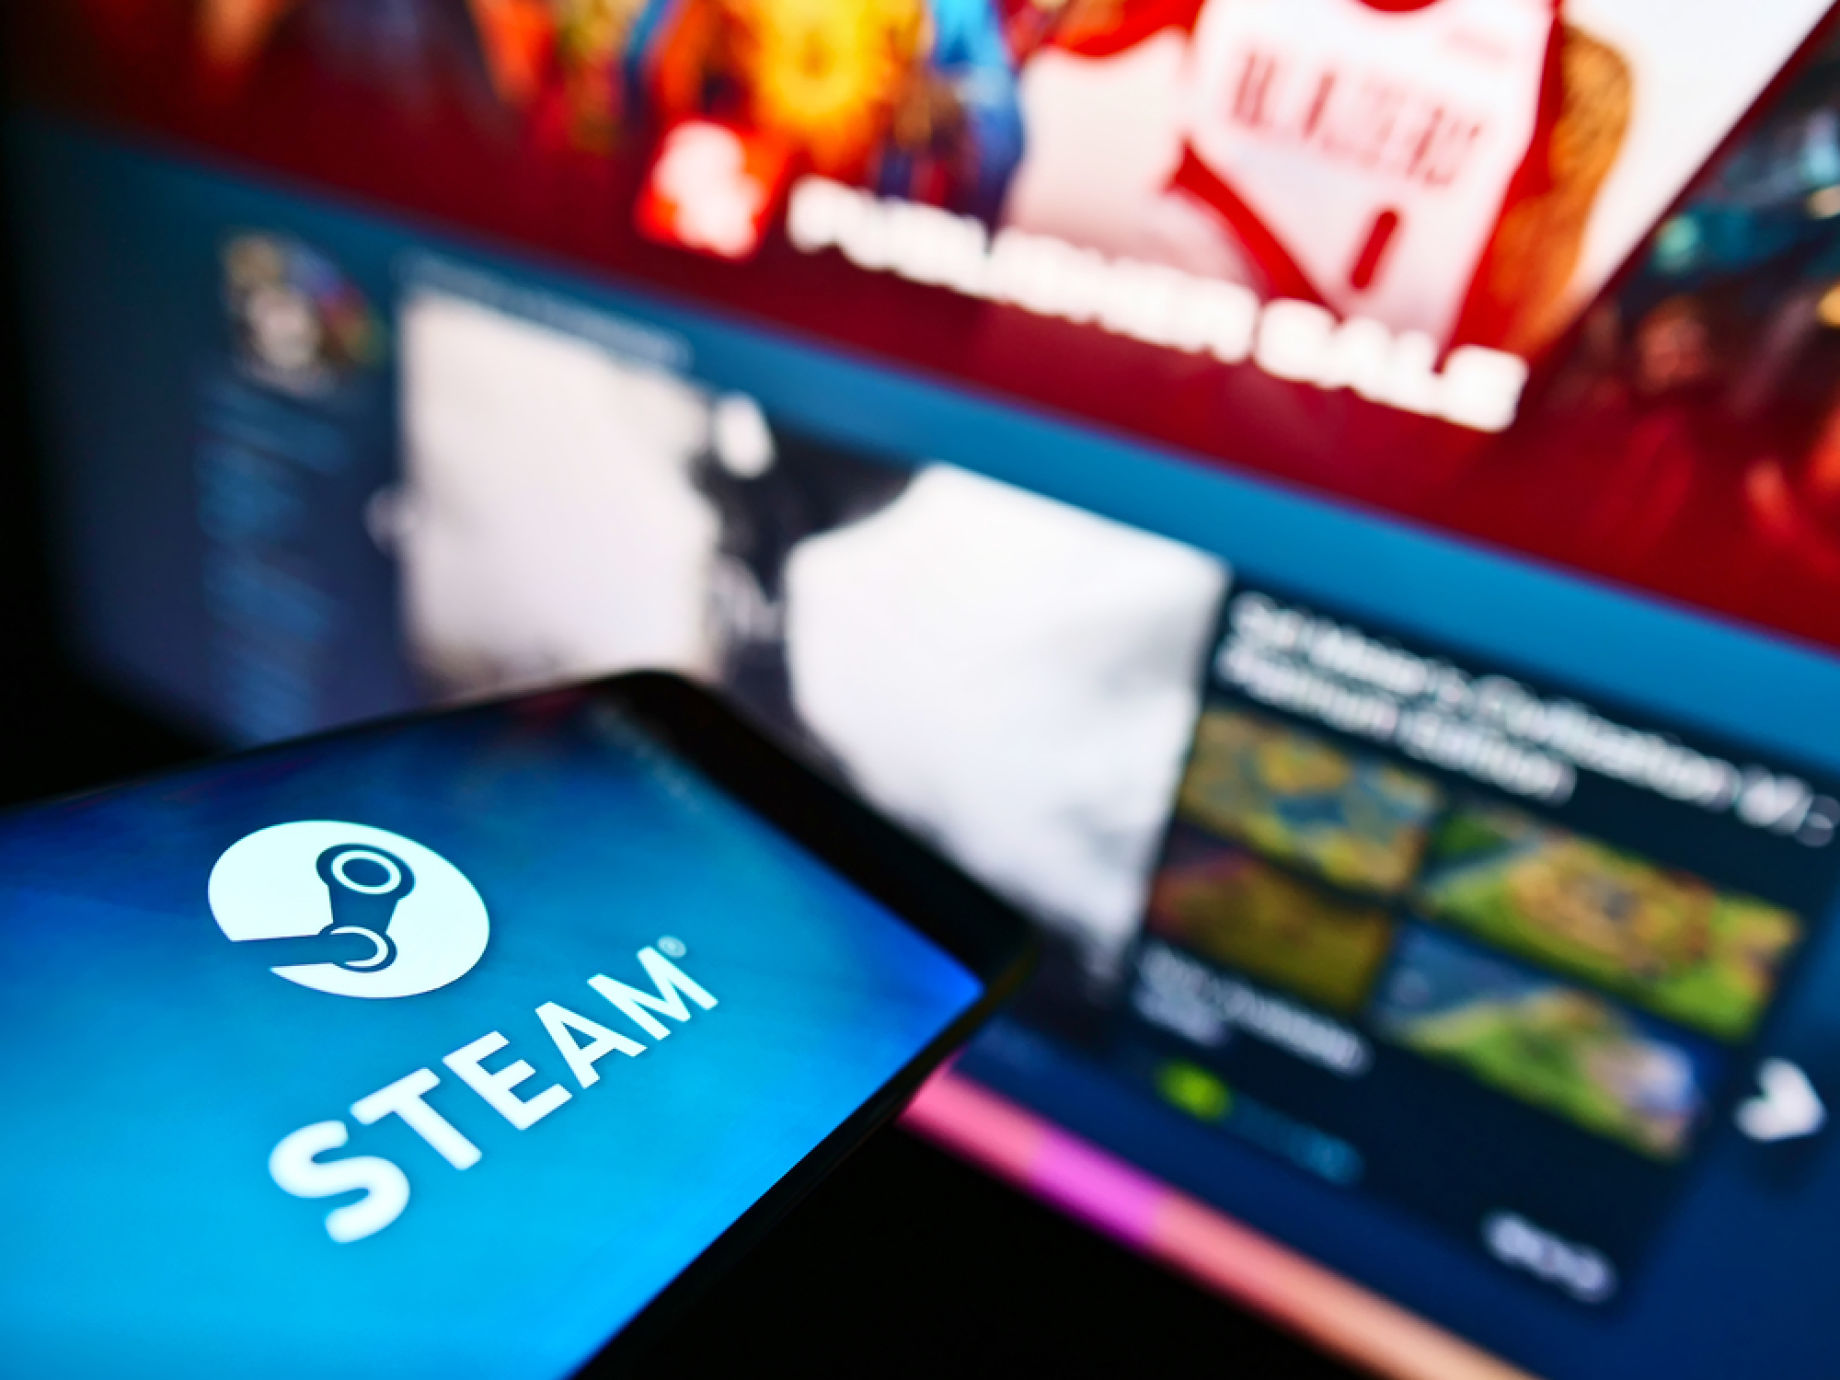 How to Stop Steam Pop-Up Ads on Launch